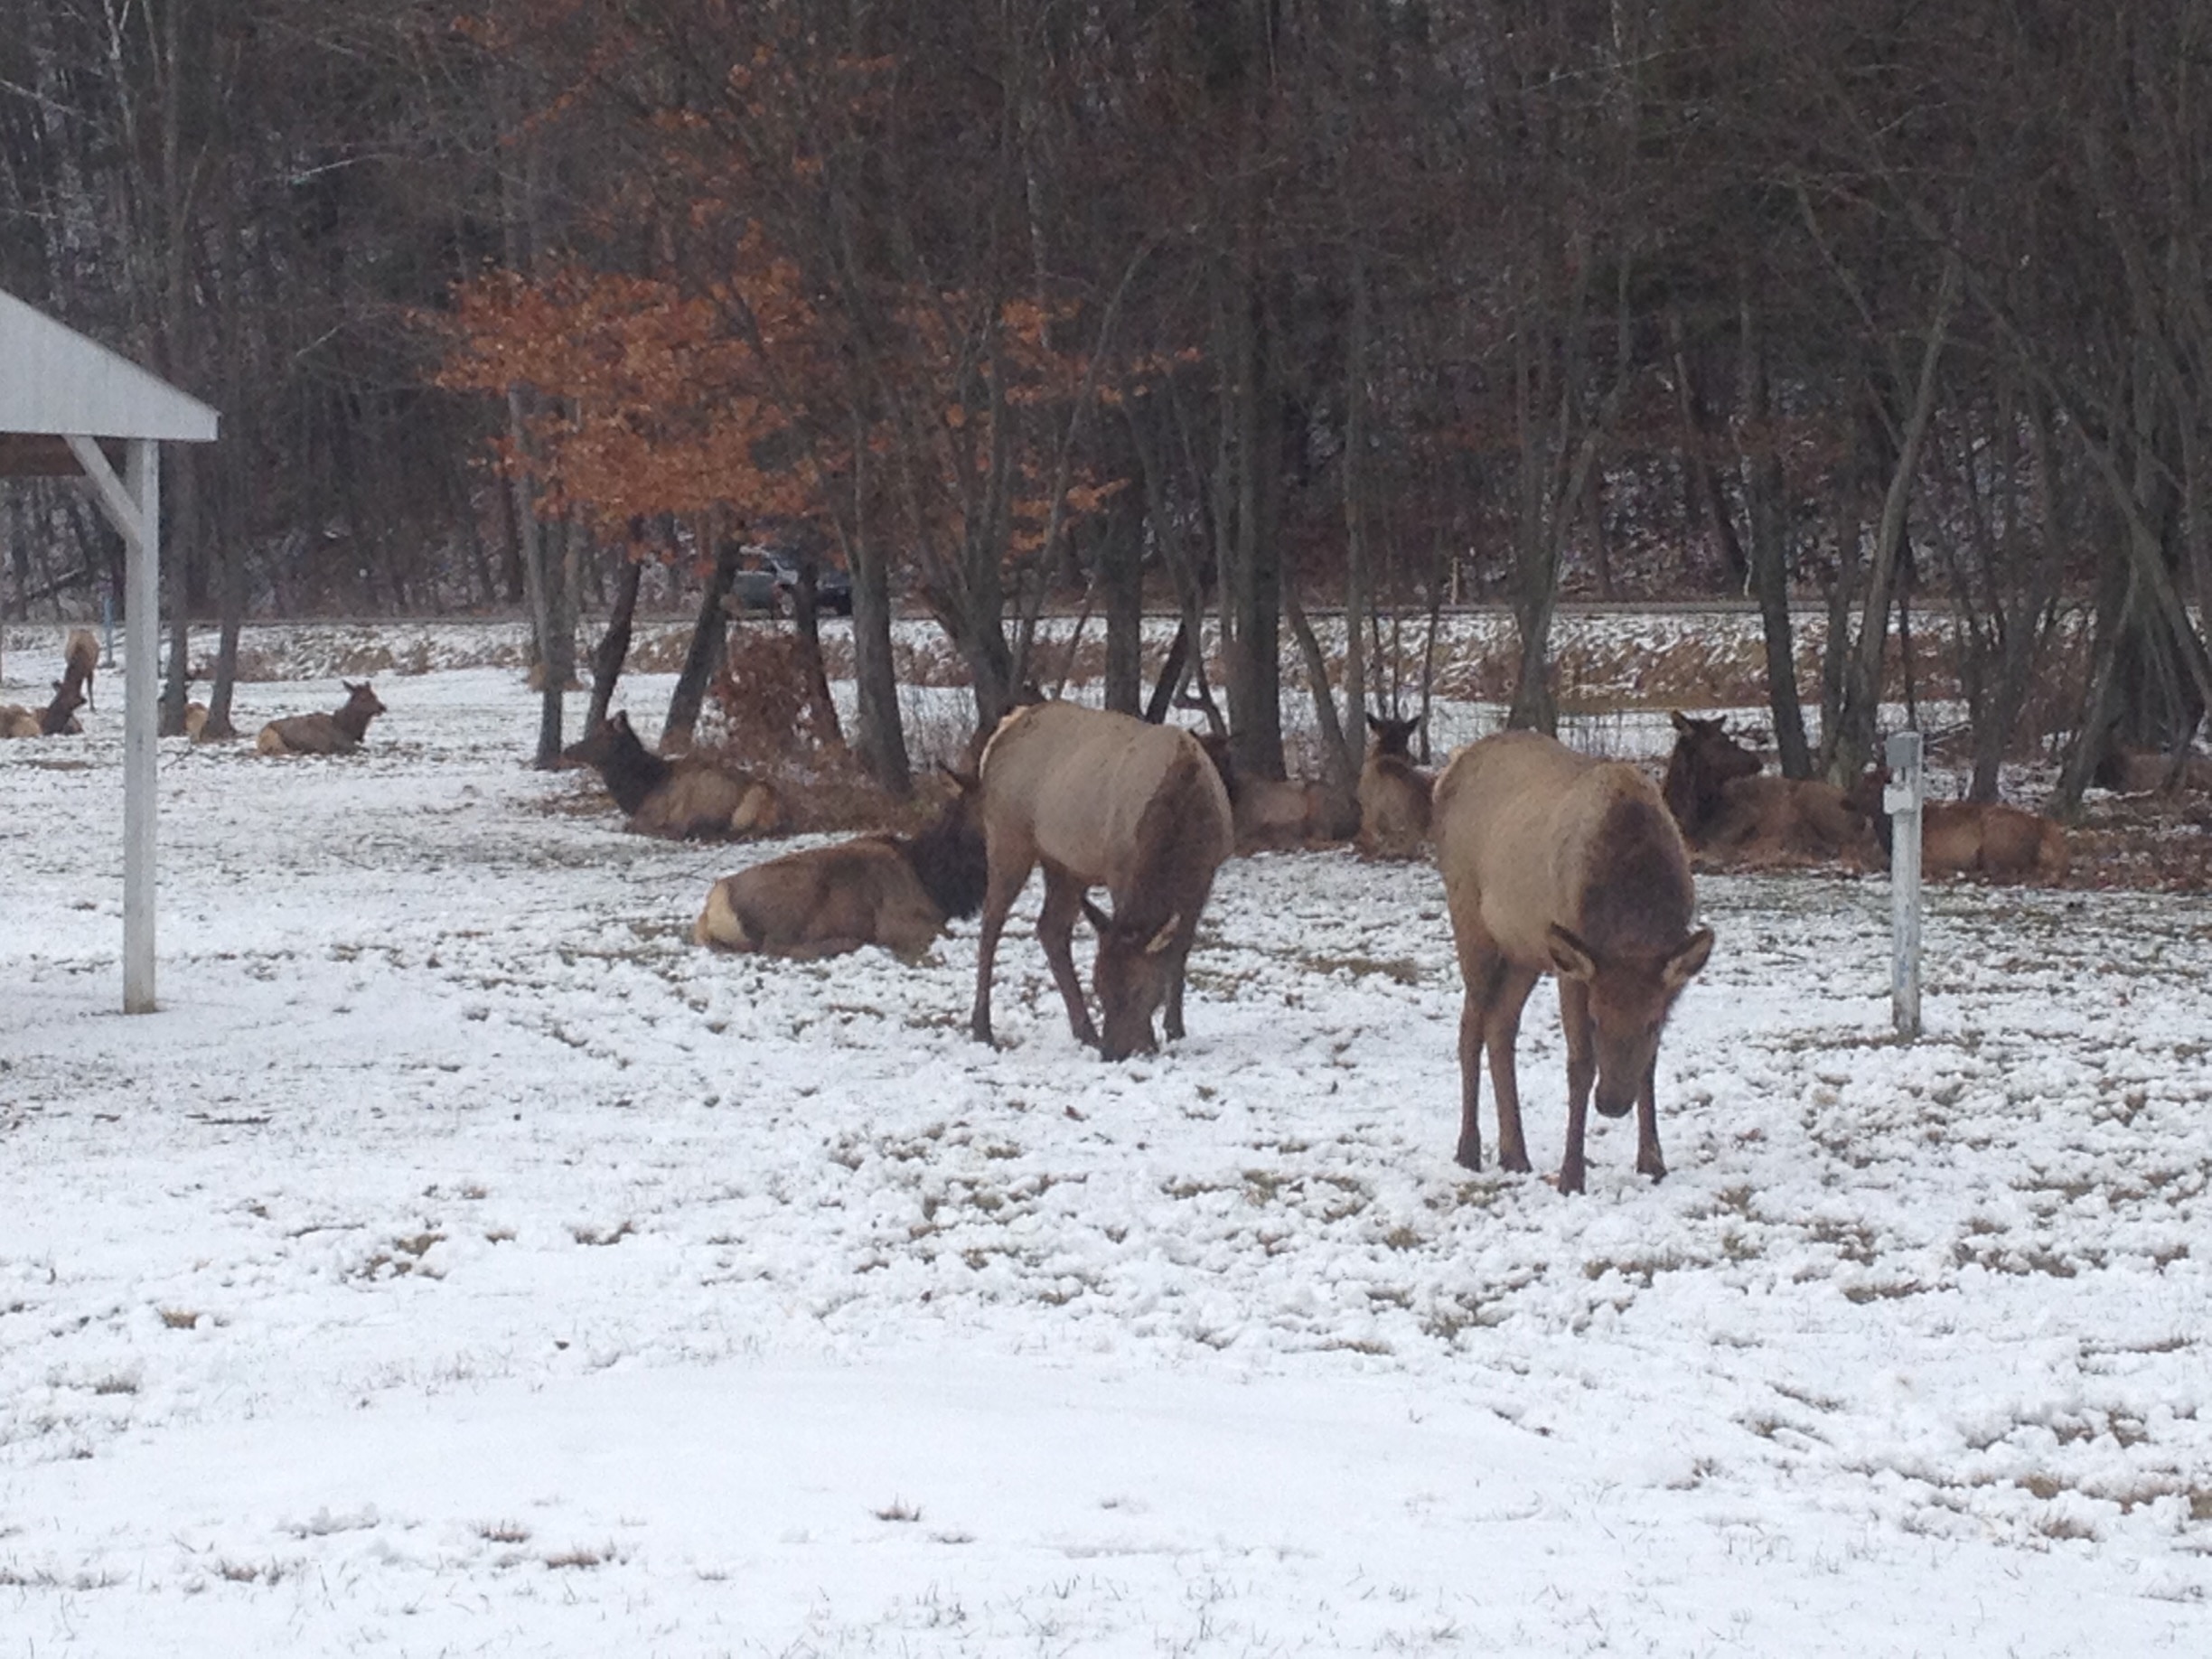 Elk County Pennsylvania - the herd of elk was previously extinct from hunting, so Rocky Mountain elk were brought from the west to repopulate. Now, you can see dozens of elk roaming this area, the herd is now up to over 200 elk! 